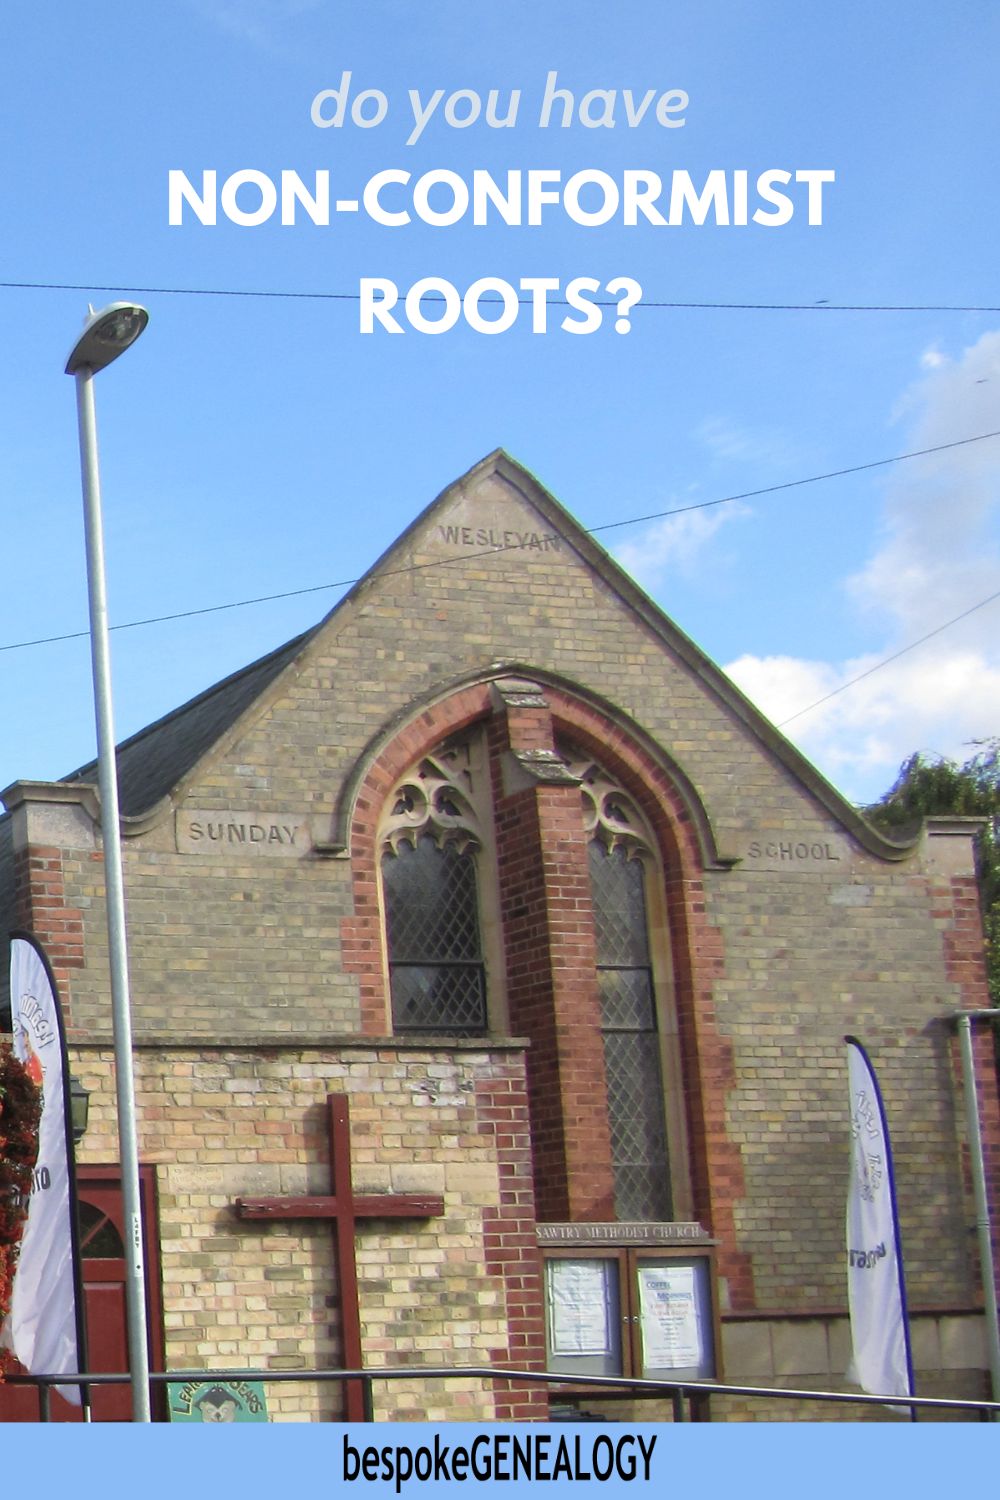 Pinterest pin. Do you have non conformist roots? Photo of a Methodist Sunday School in England.